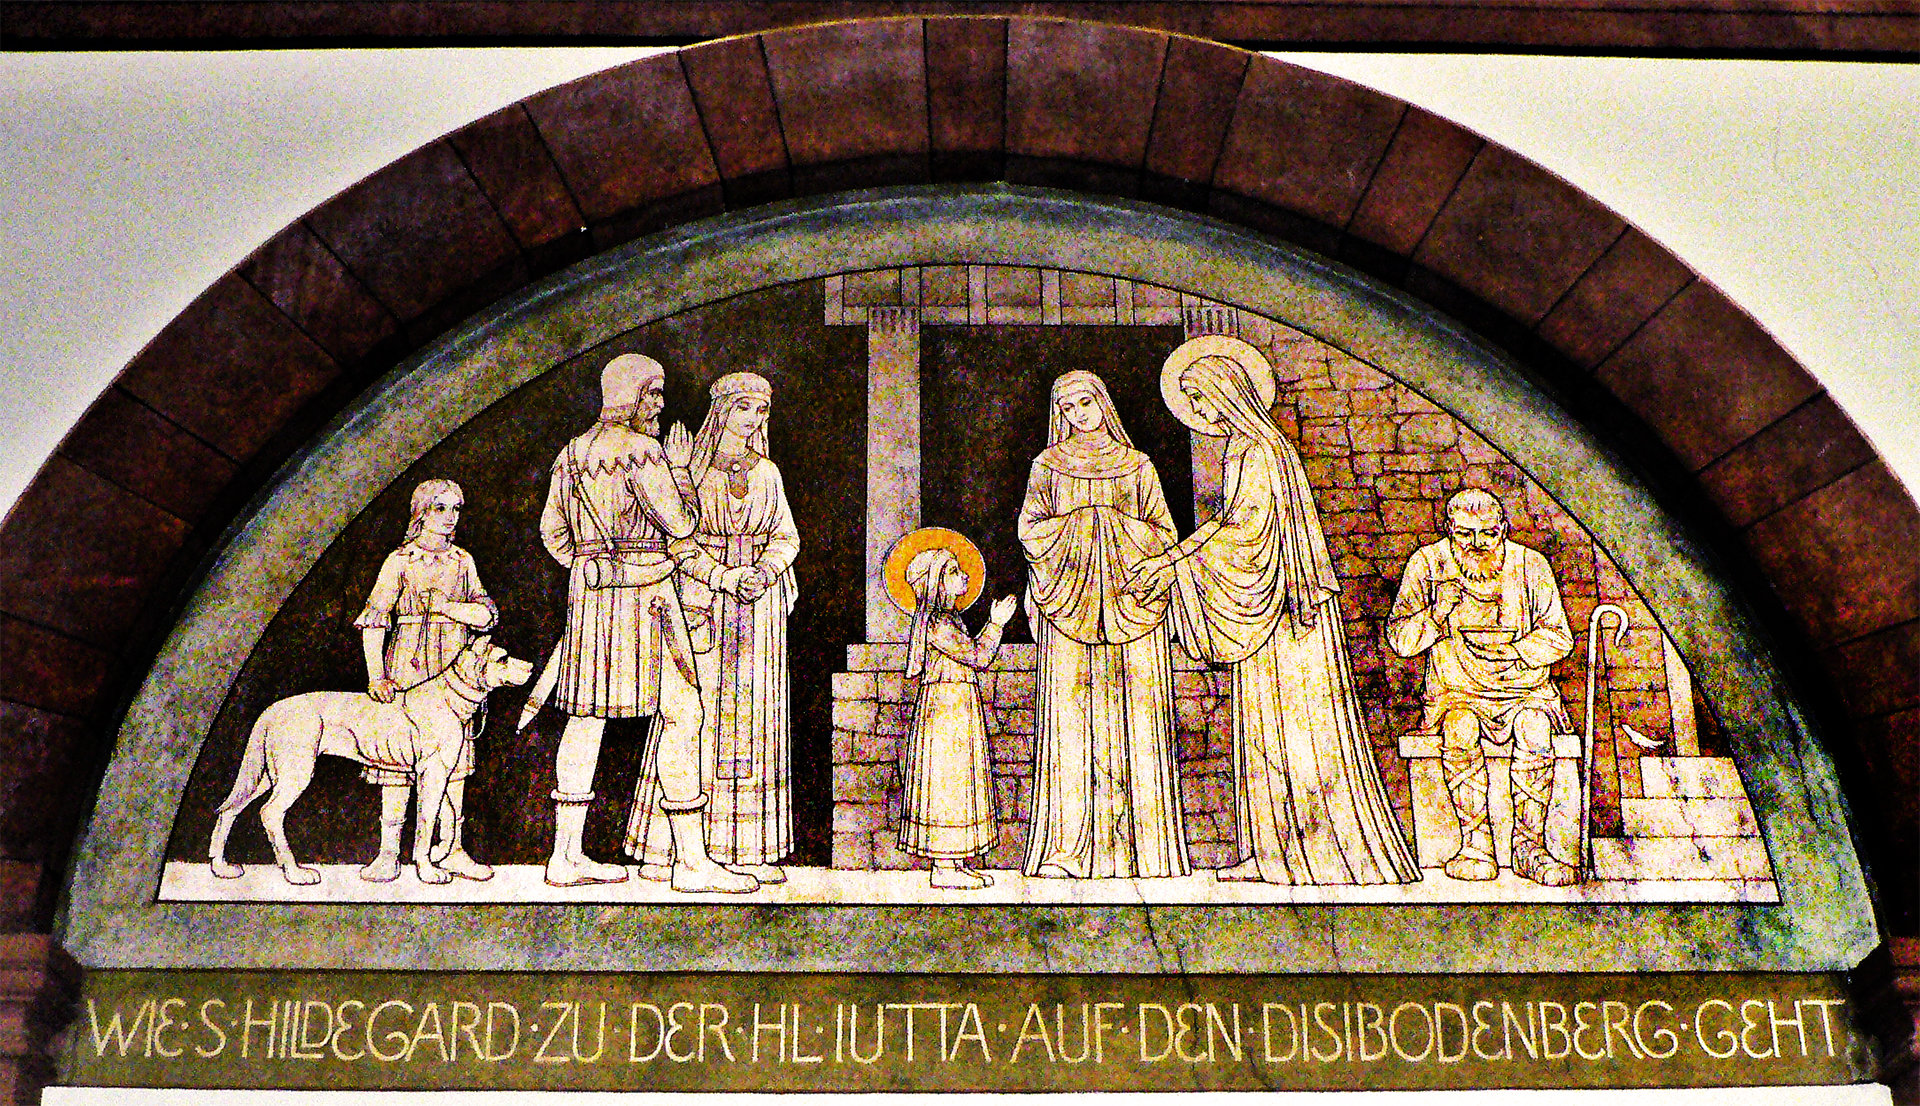 A semi-circular church tympanum featuring a relief depicting a young Hildegard of Bingen with St. Jutta. The scene shows a group of figures in medieval attire. In the center, a young girl, presumably Hildegard, stands before two veiled women, one of whom is likely St. Jutta, extending her hands in instruction or blessing towards Hildegard. The tympanum has a German inscription at the bottom, indicating the subject as Hildegard's journey to the Disibodenberg monastery.